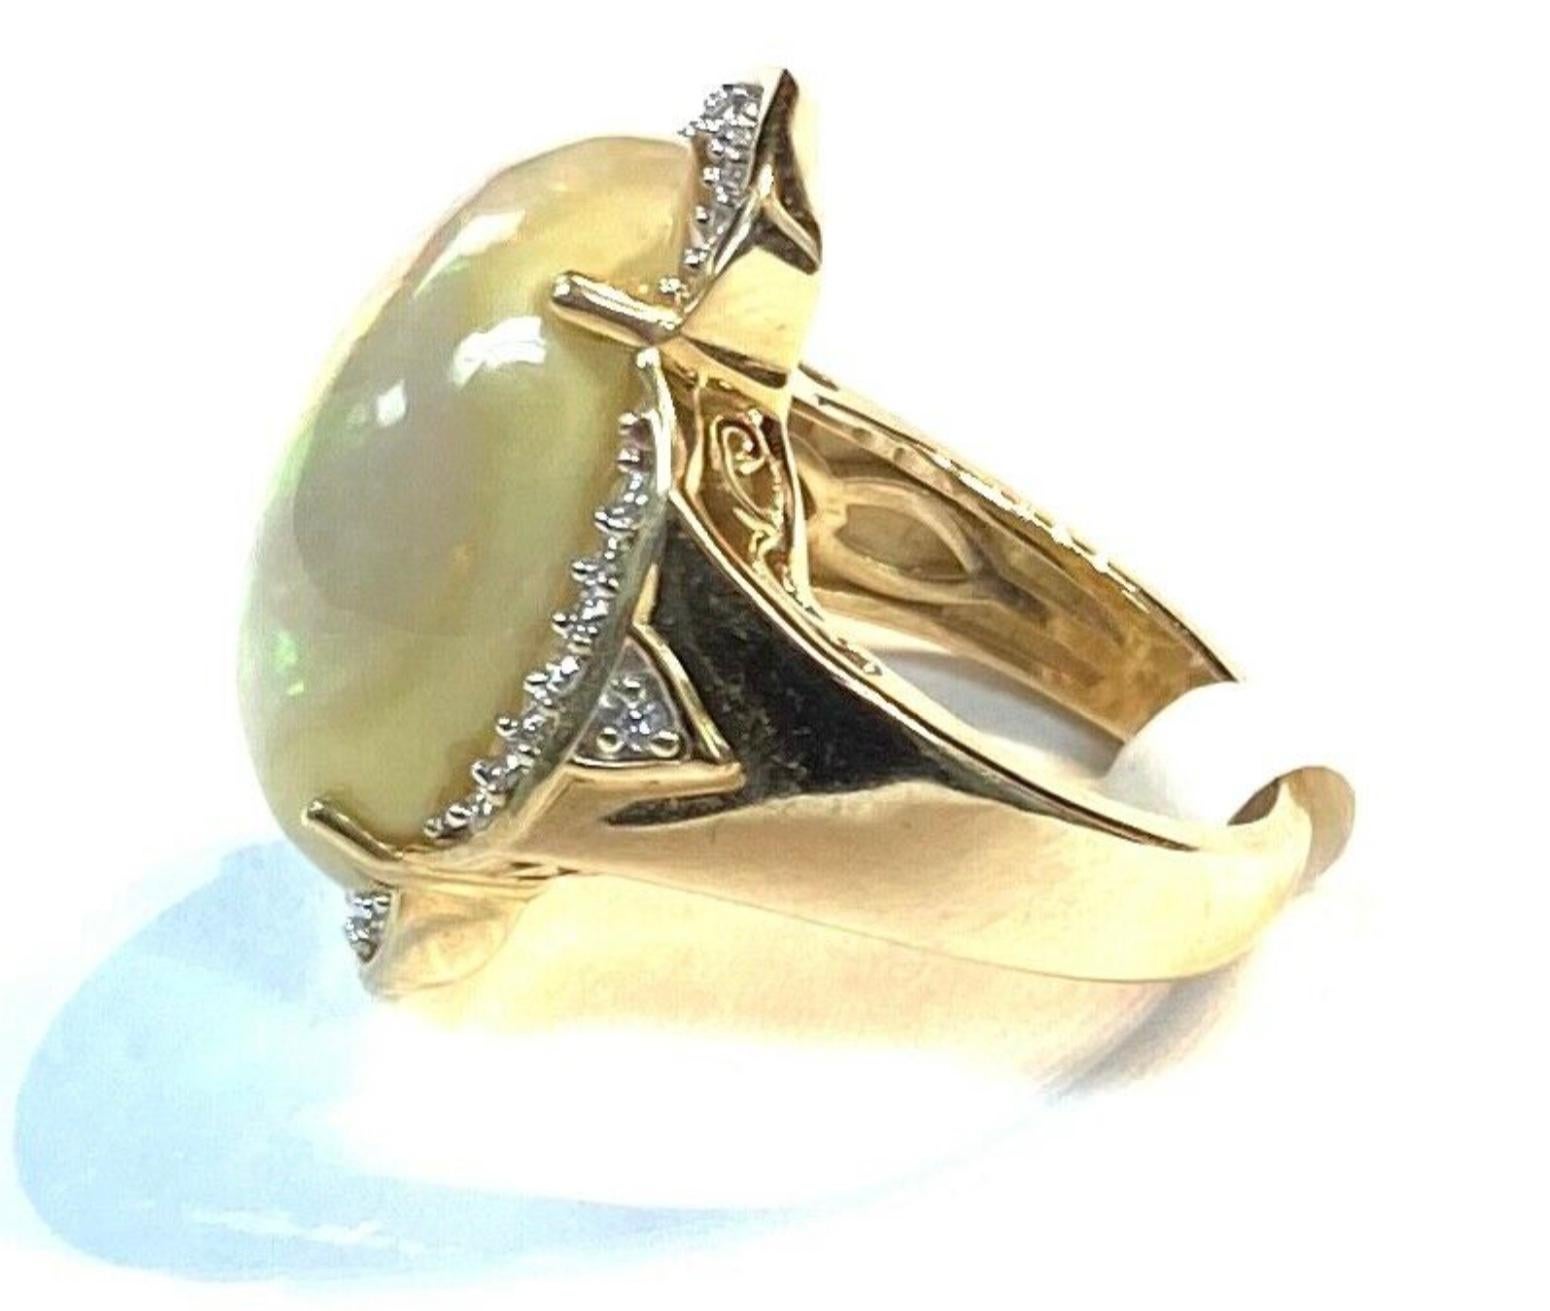 Beautiful 14k yellow gold opal encircled with diamonds ring.  7.15 Grams TW. The dimensions of the opal are approximately 13 mm x 20 mm. Approximately 8 carats. Marked 14K. Approximate size 4.5.